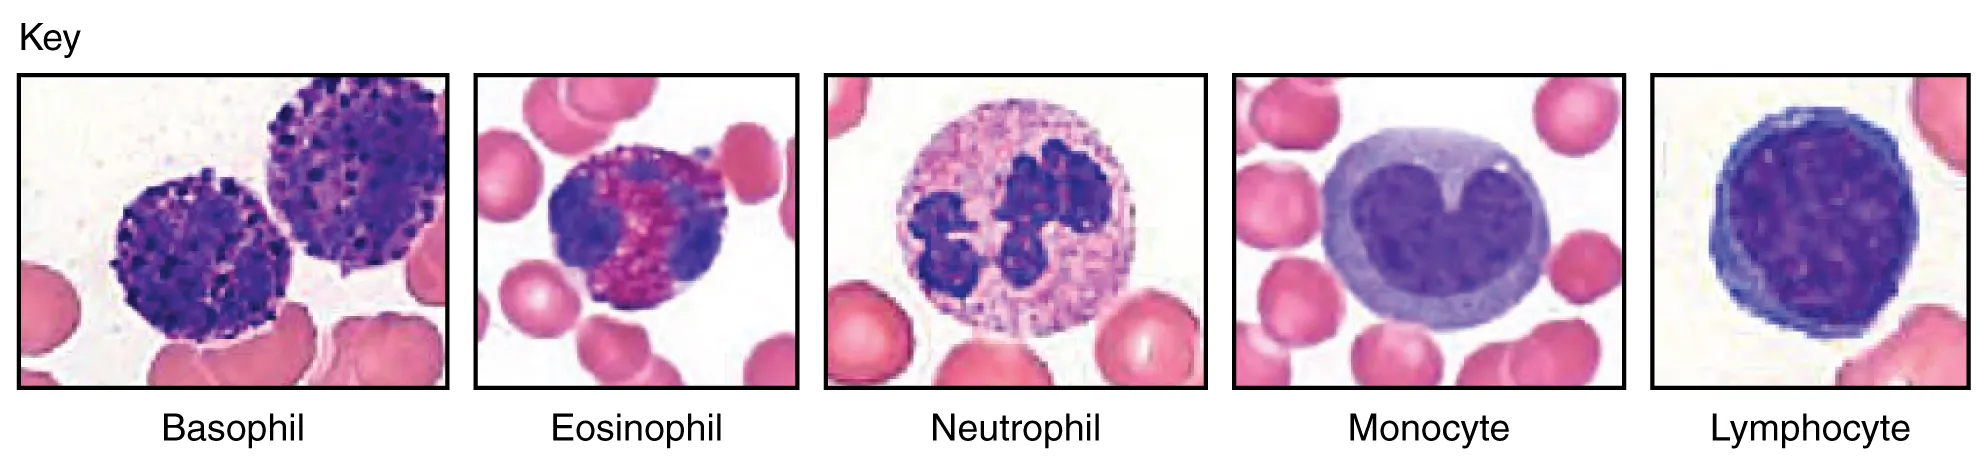 This figure shows micrographs of the different types of leukocytes. From left to right, the order of leukocytes shown are: basophil, eosinophil, neutrophil, monocyte, and lymphocyte.